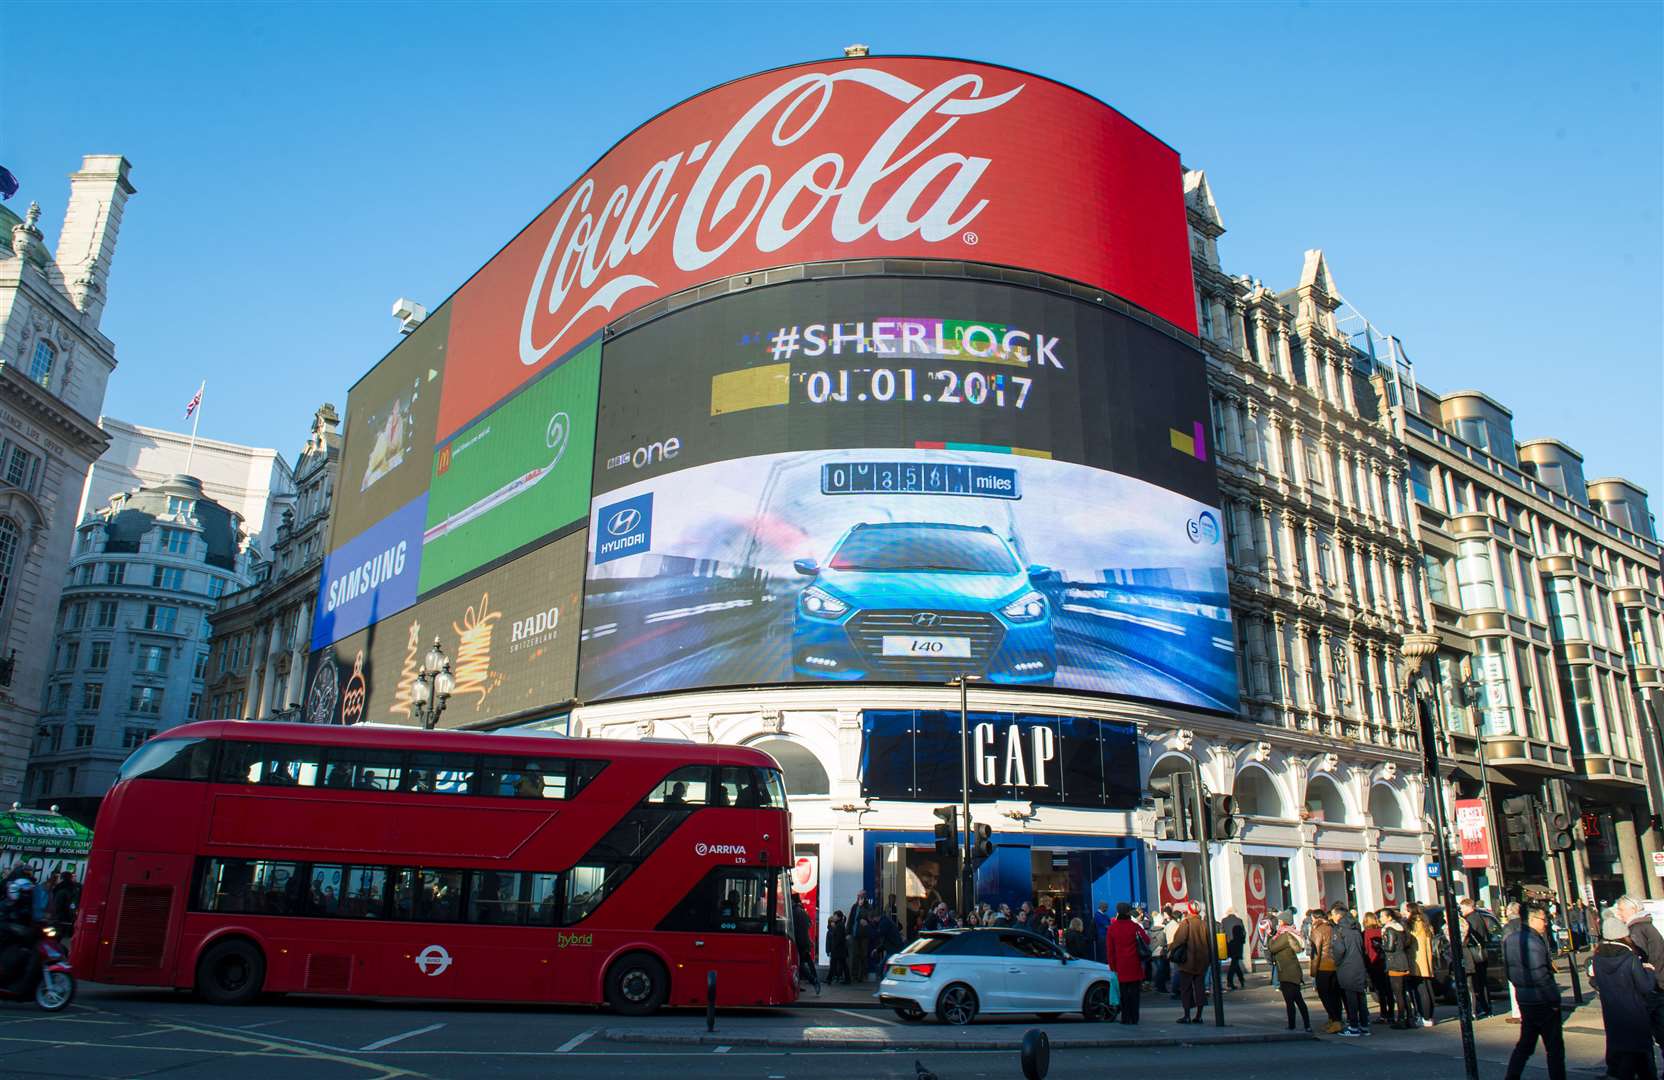 Queen's image and message of hope light up Piccadilly Circus